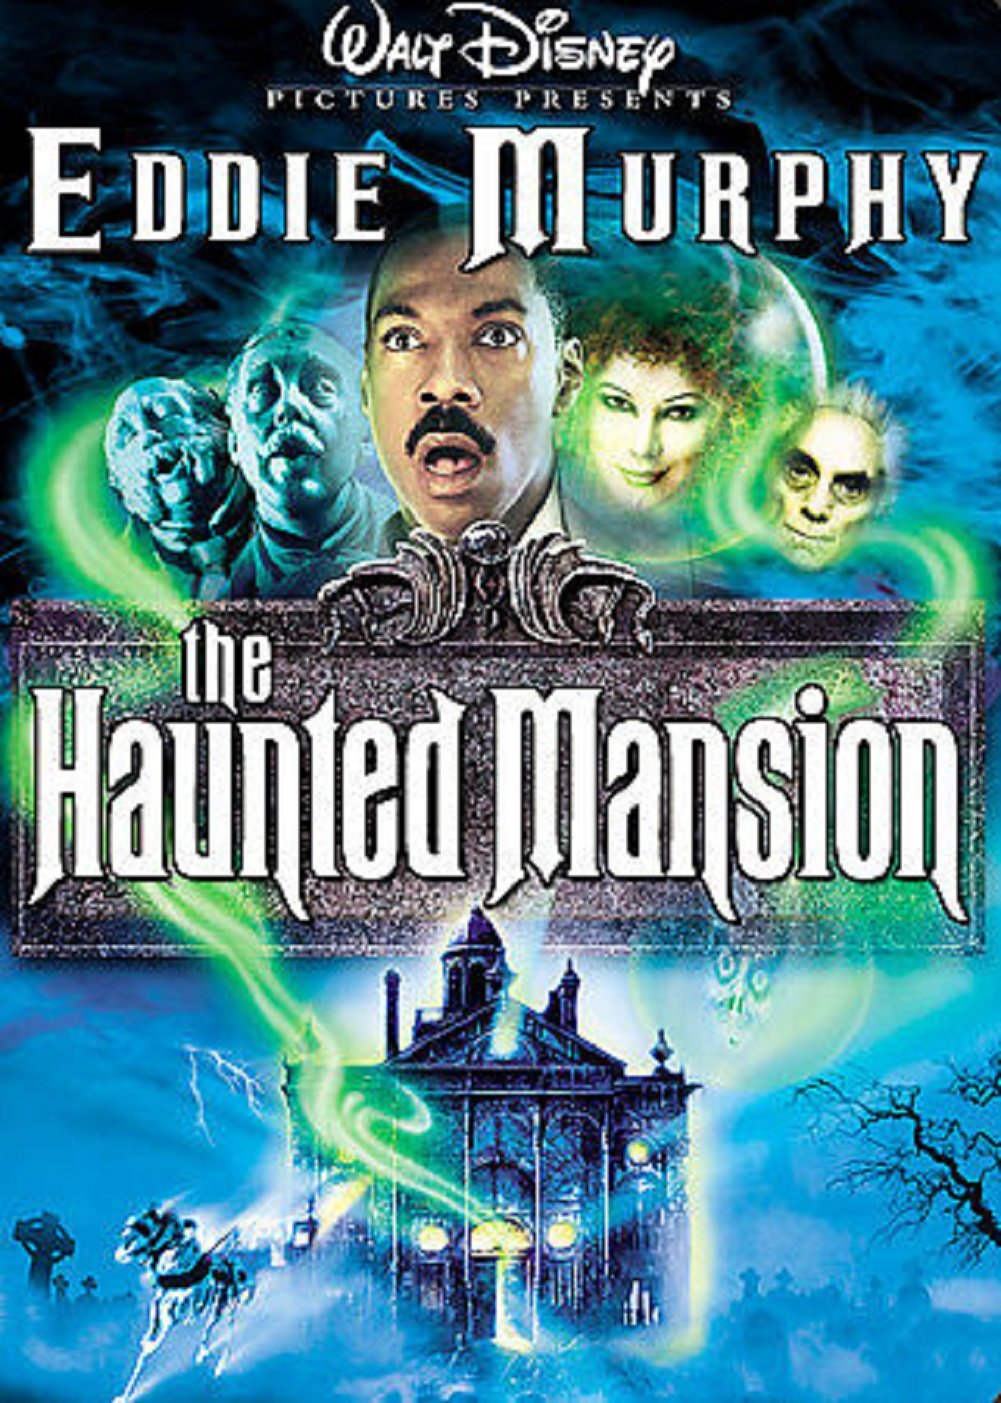 The Haunted Mansion (DVD, 2004, Full Frame Edition) BRAND NEW